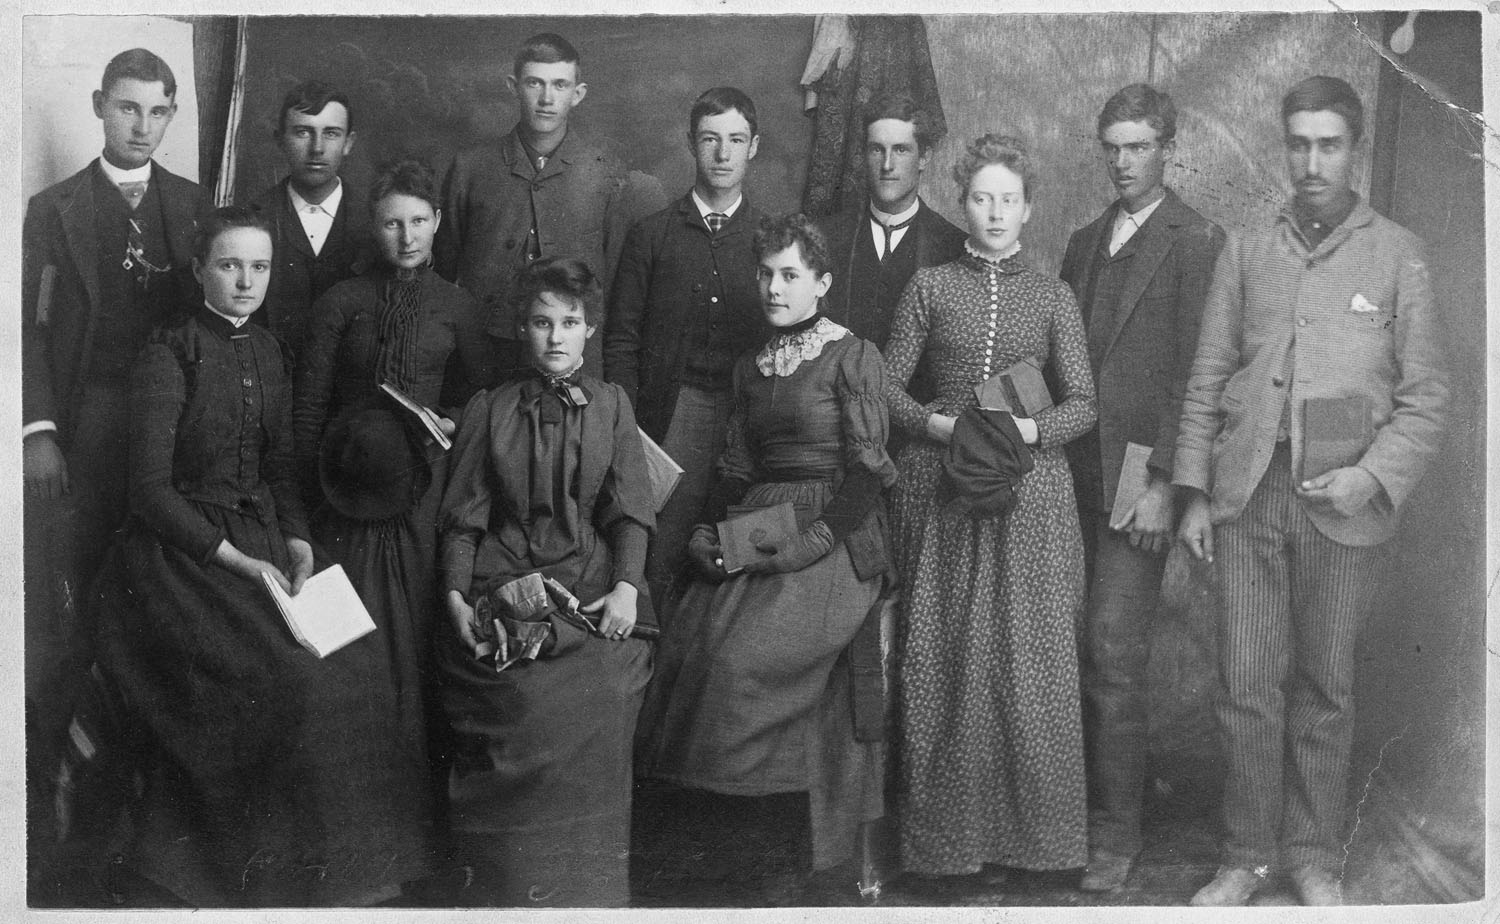 Fabian Garcia with the first freshman class at New Mexico College of Agriculture and Mechanic Arts, 1889